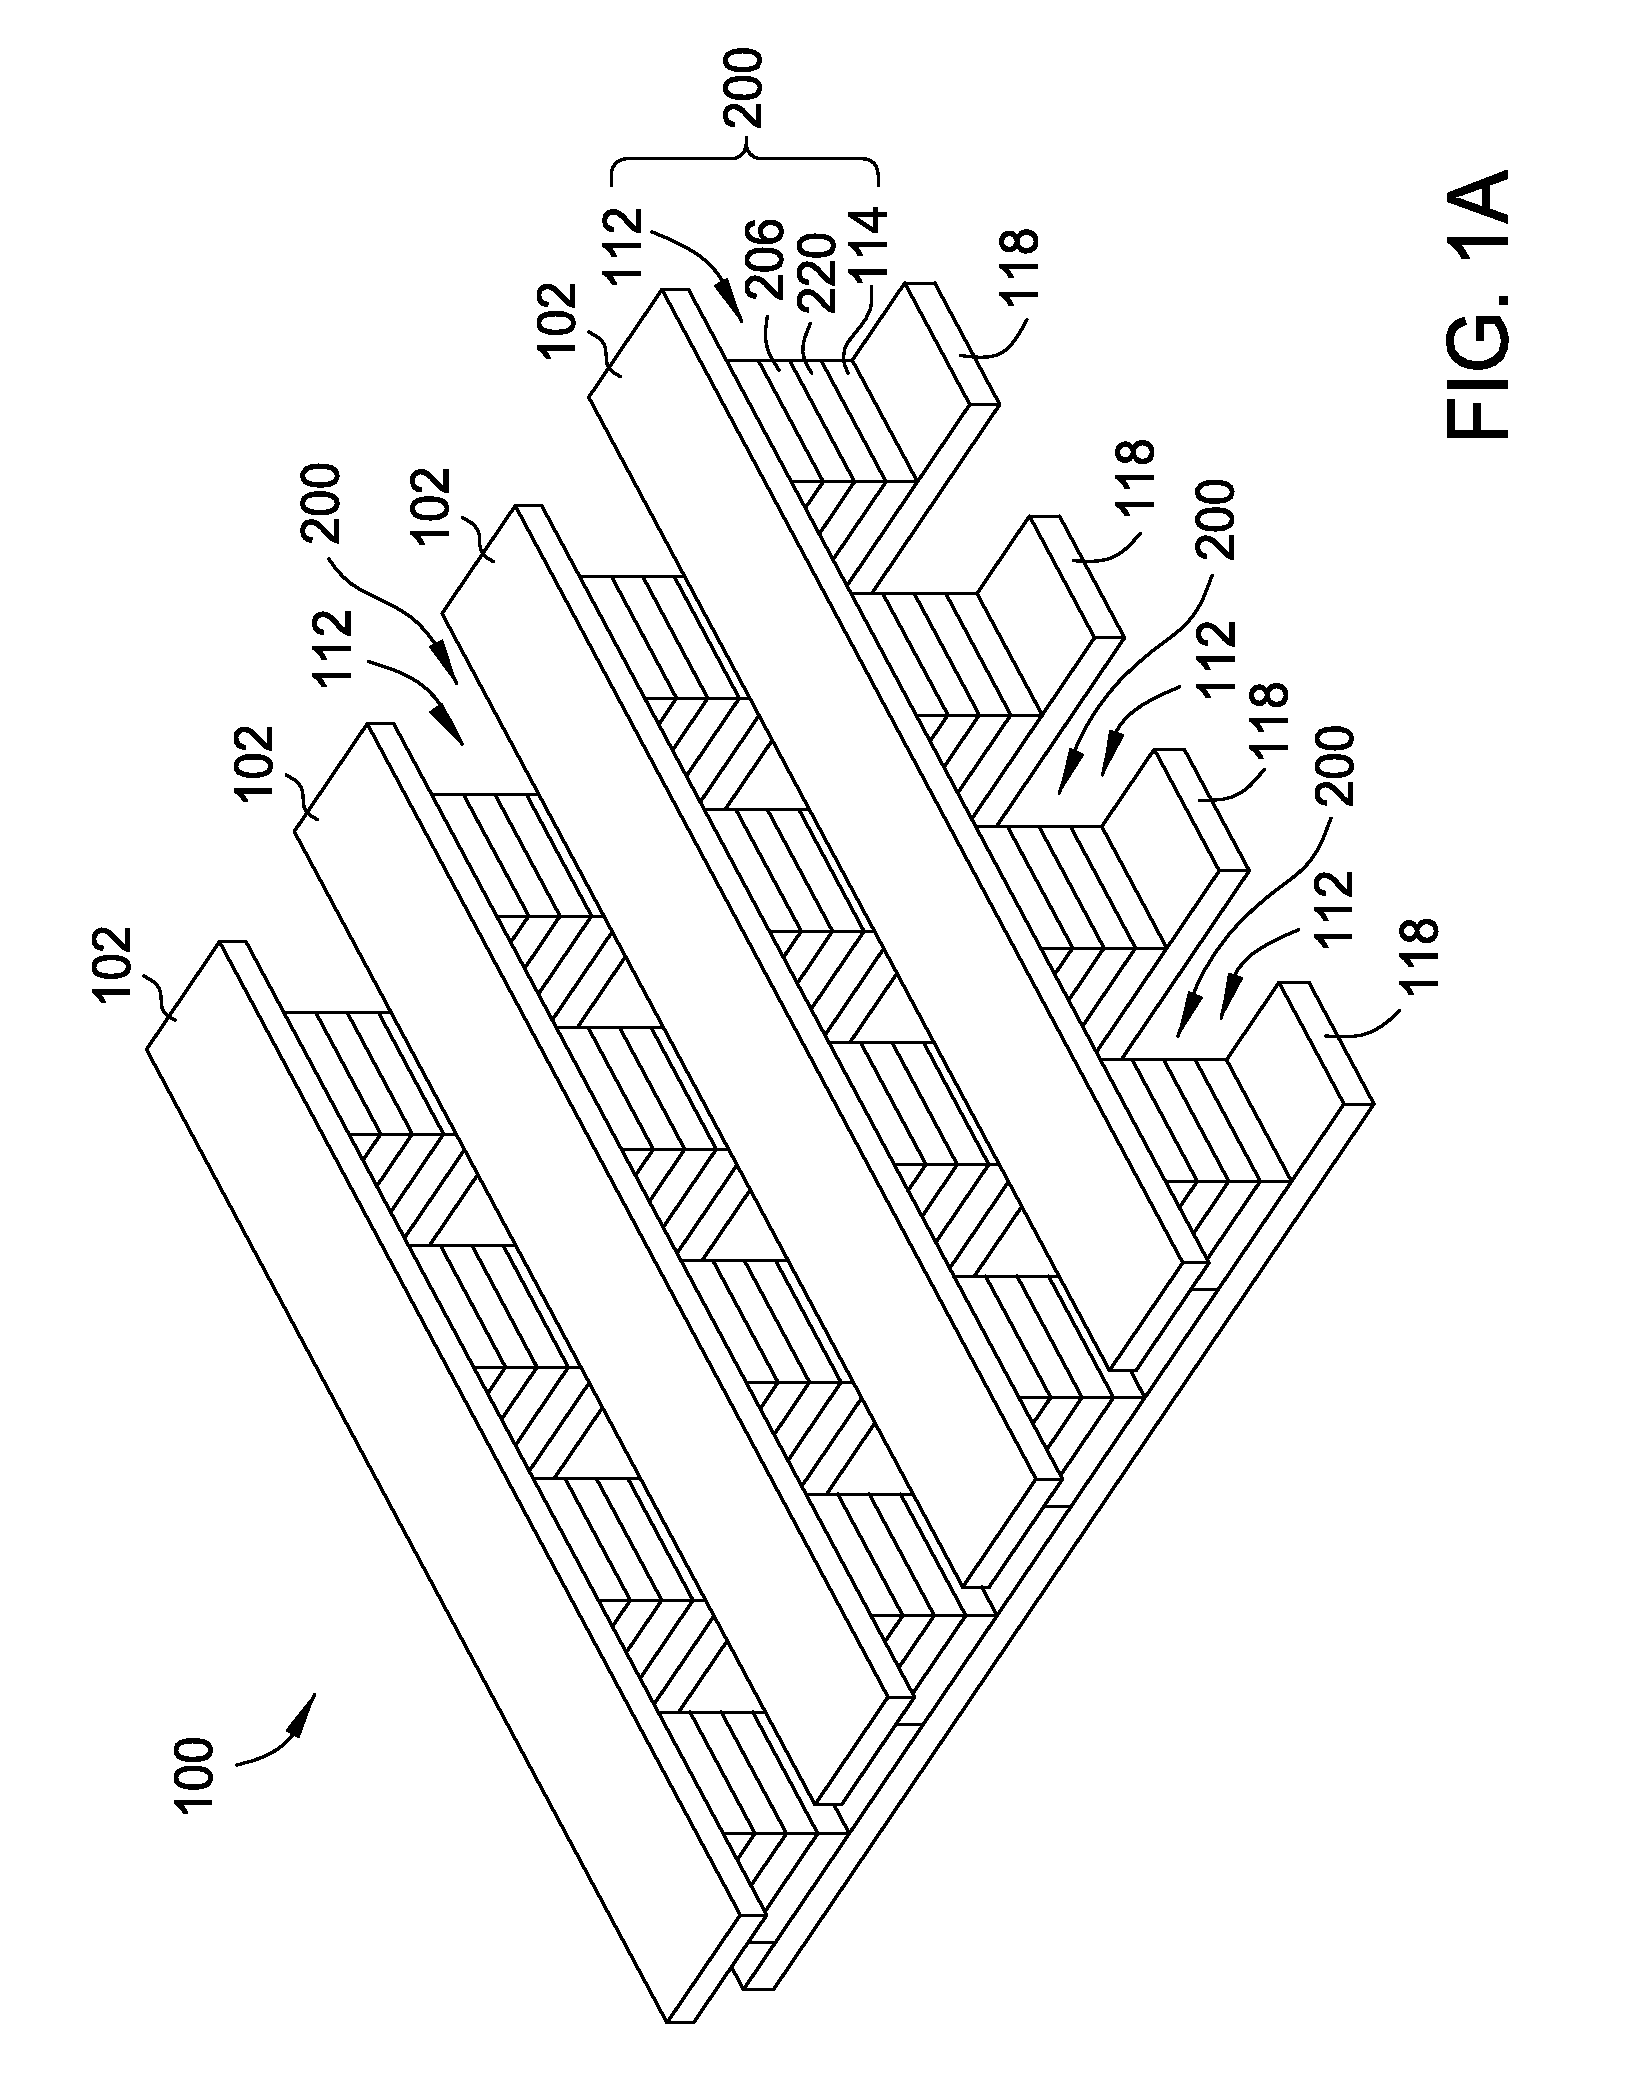 Memory device having an integrated two-terminal current limiting resistor